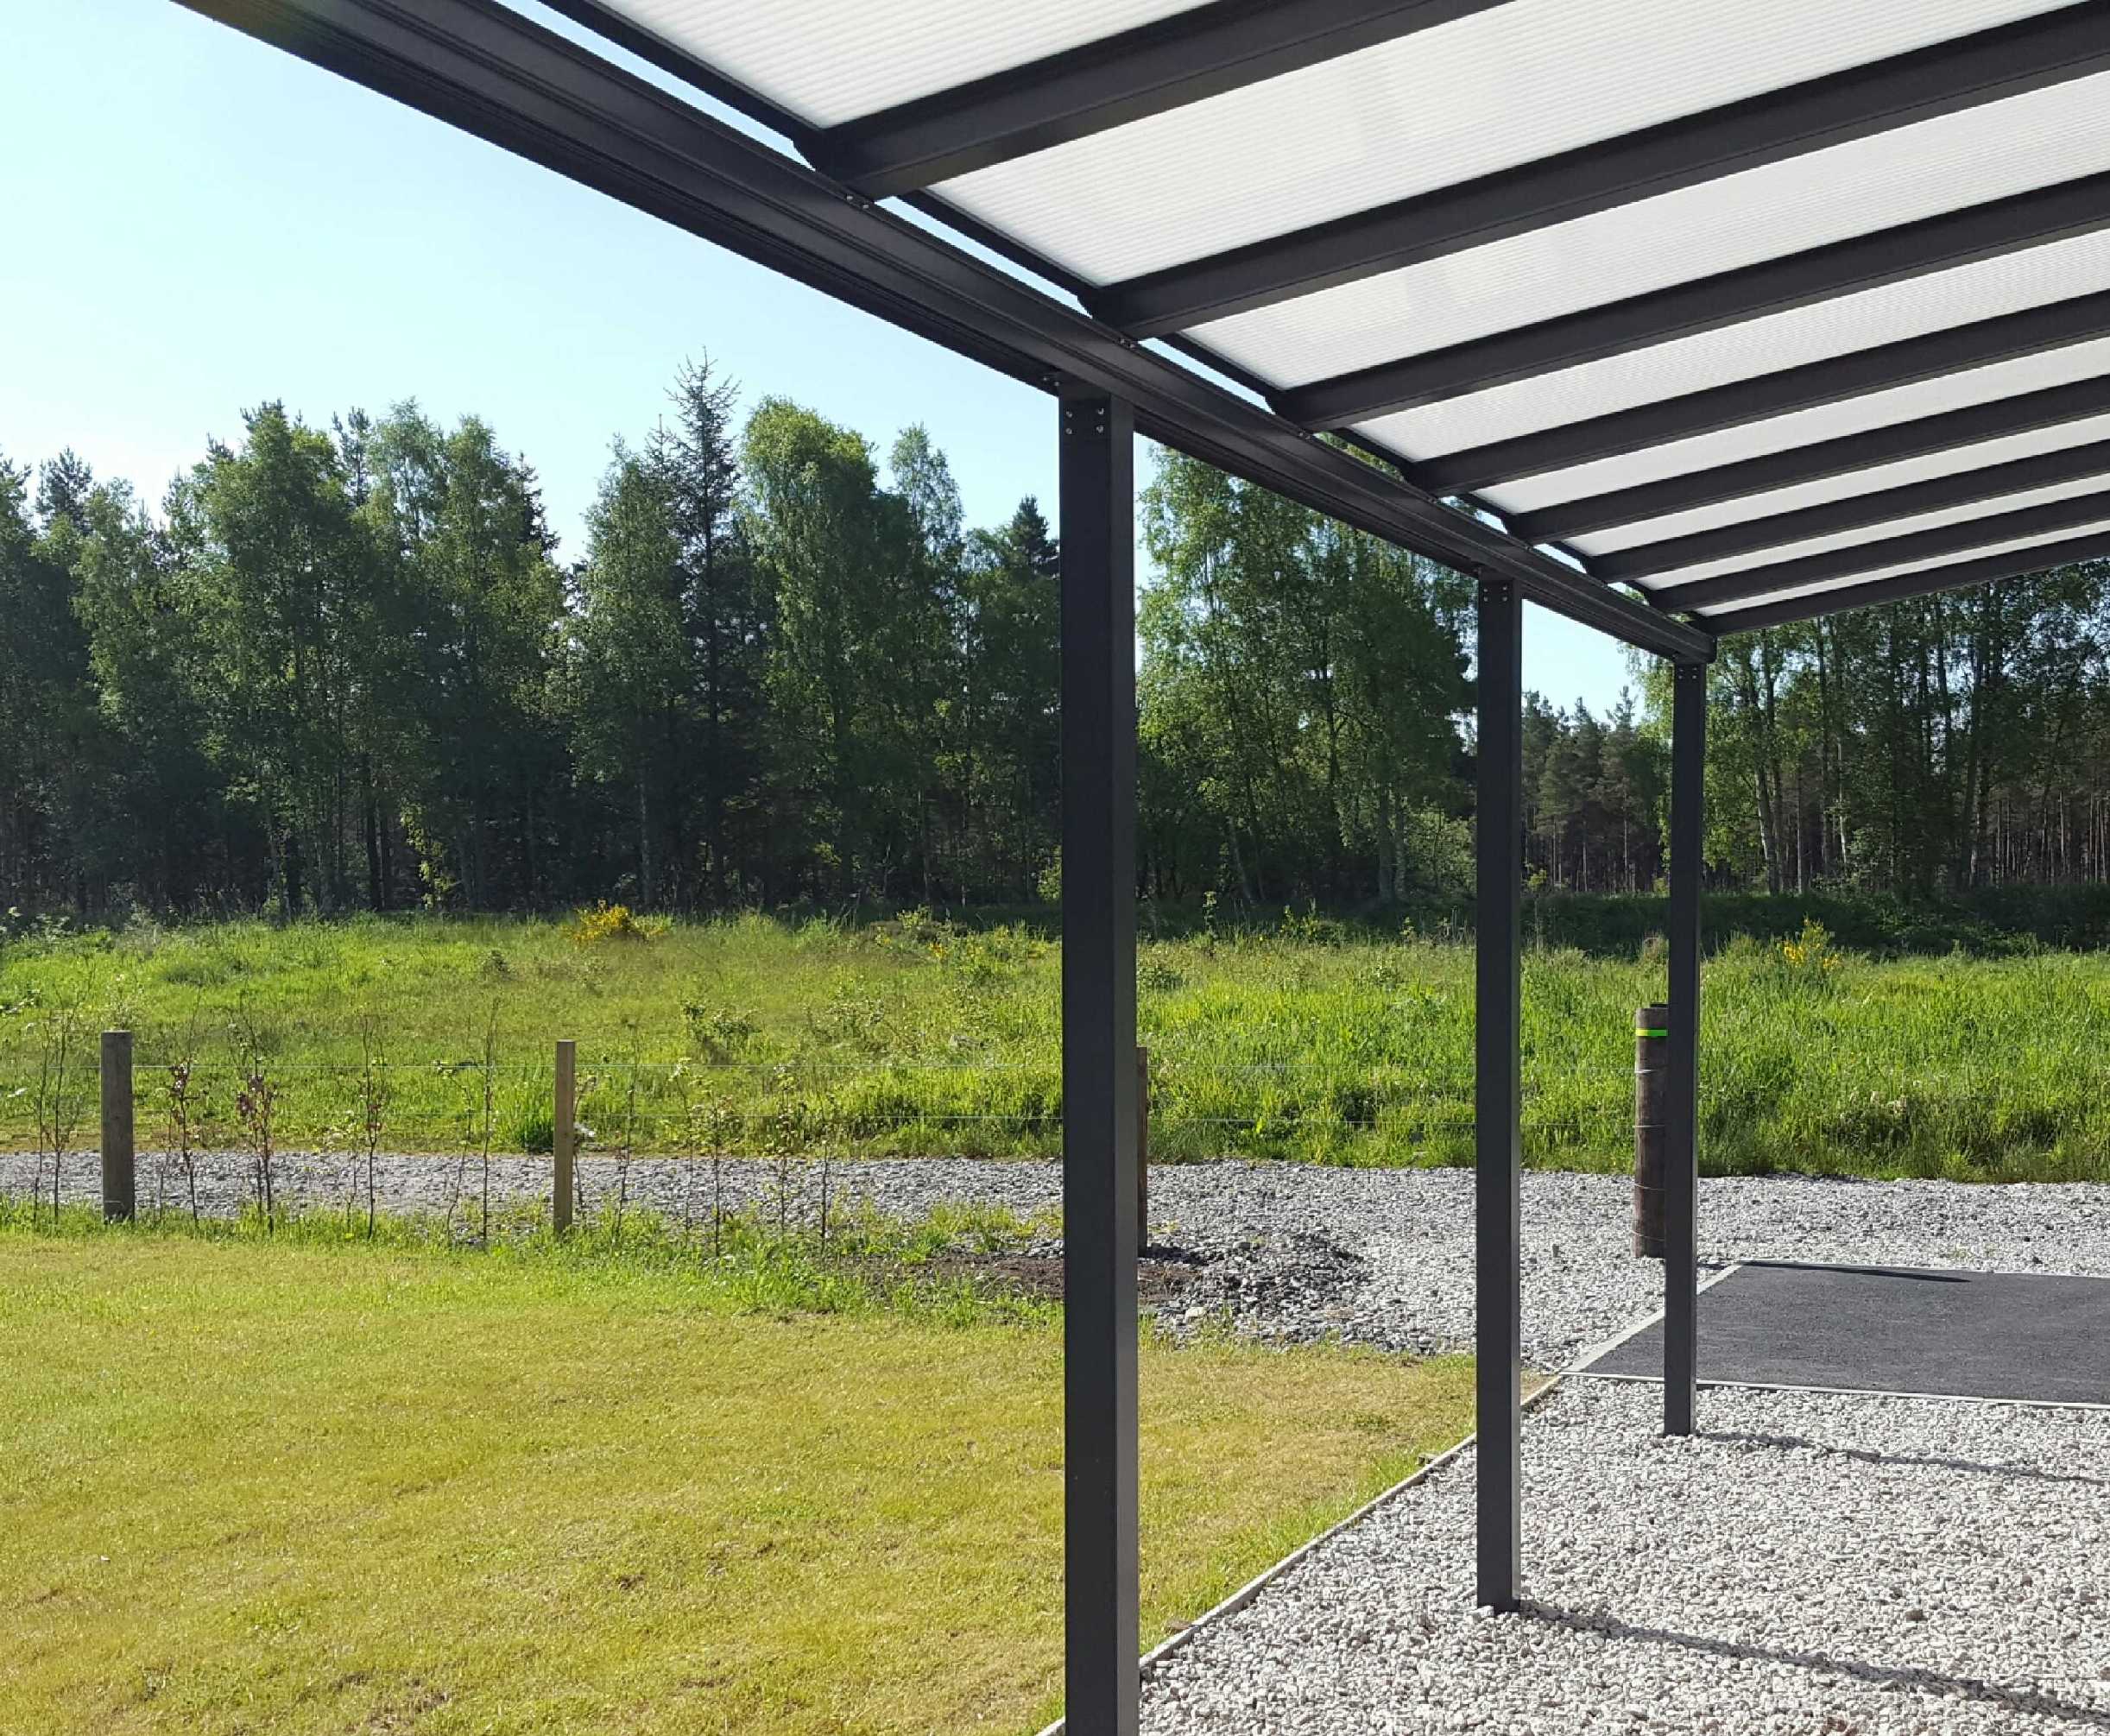 Omega Smart Lean-To Canopy, Anthracite Grey, 6mm Glass Clear Plate Polycarbonate Glazing - 7.0m (W) x 3.0m (P), (4) Supporting Posts